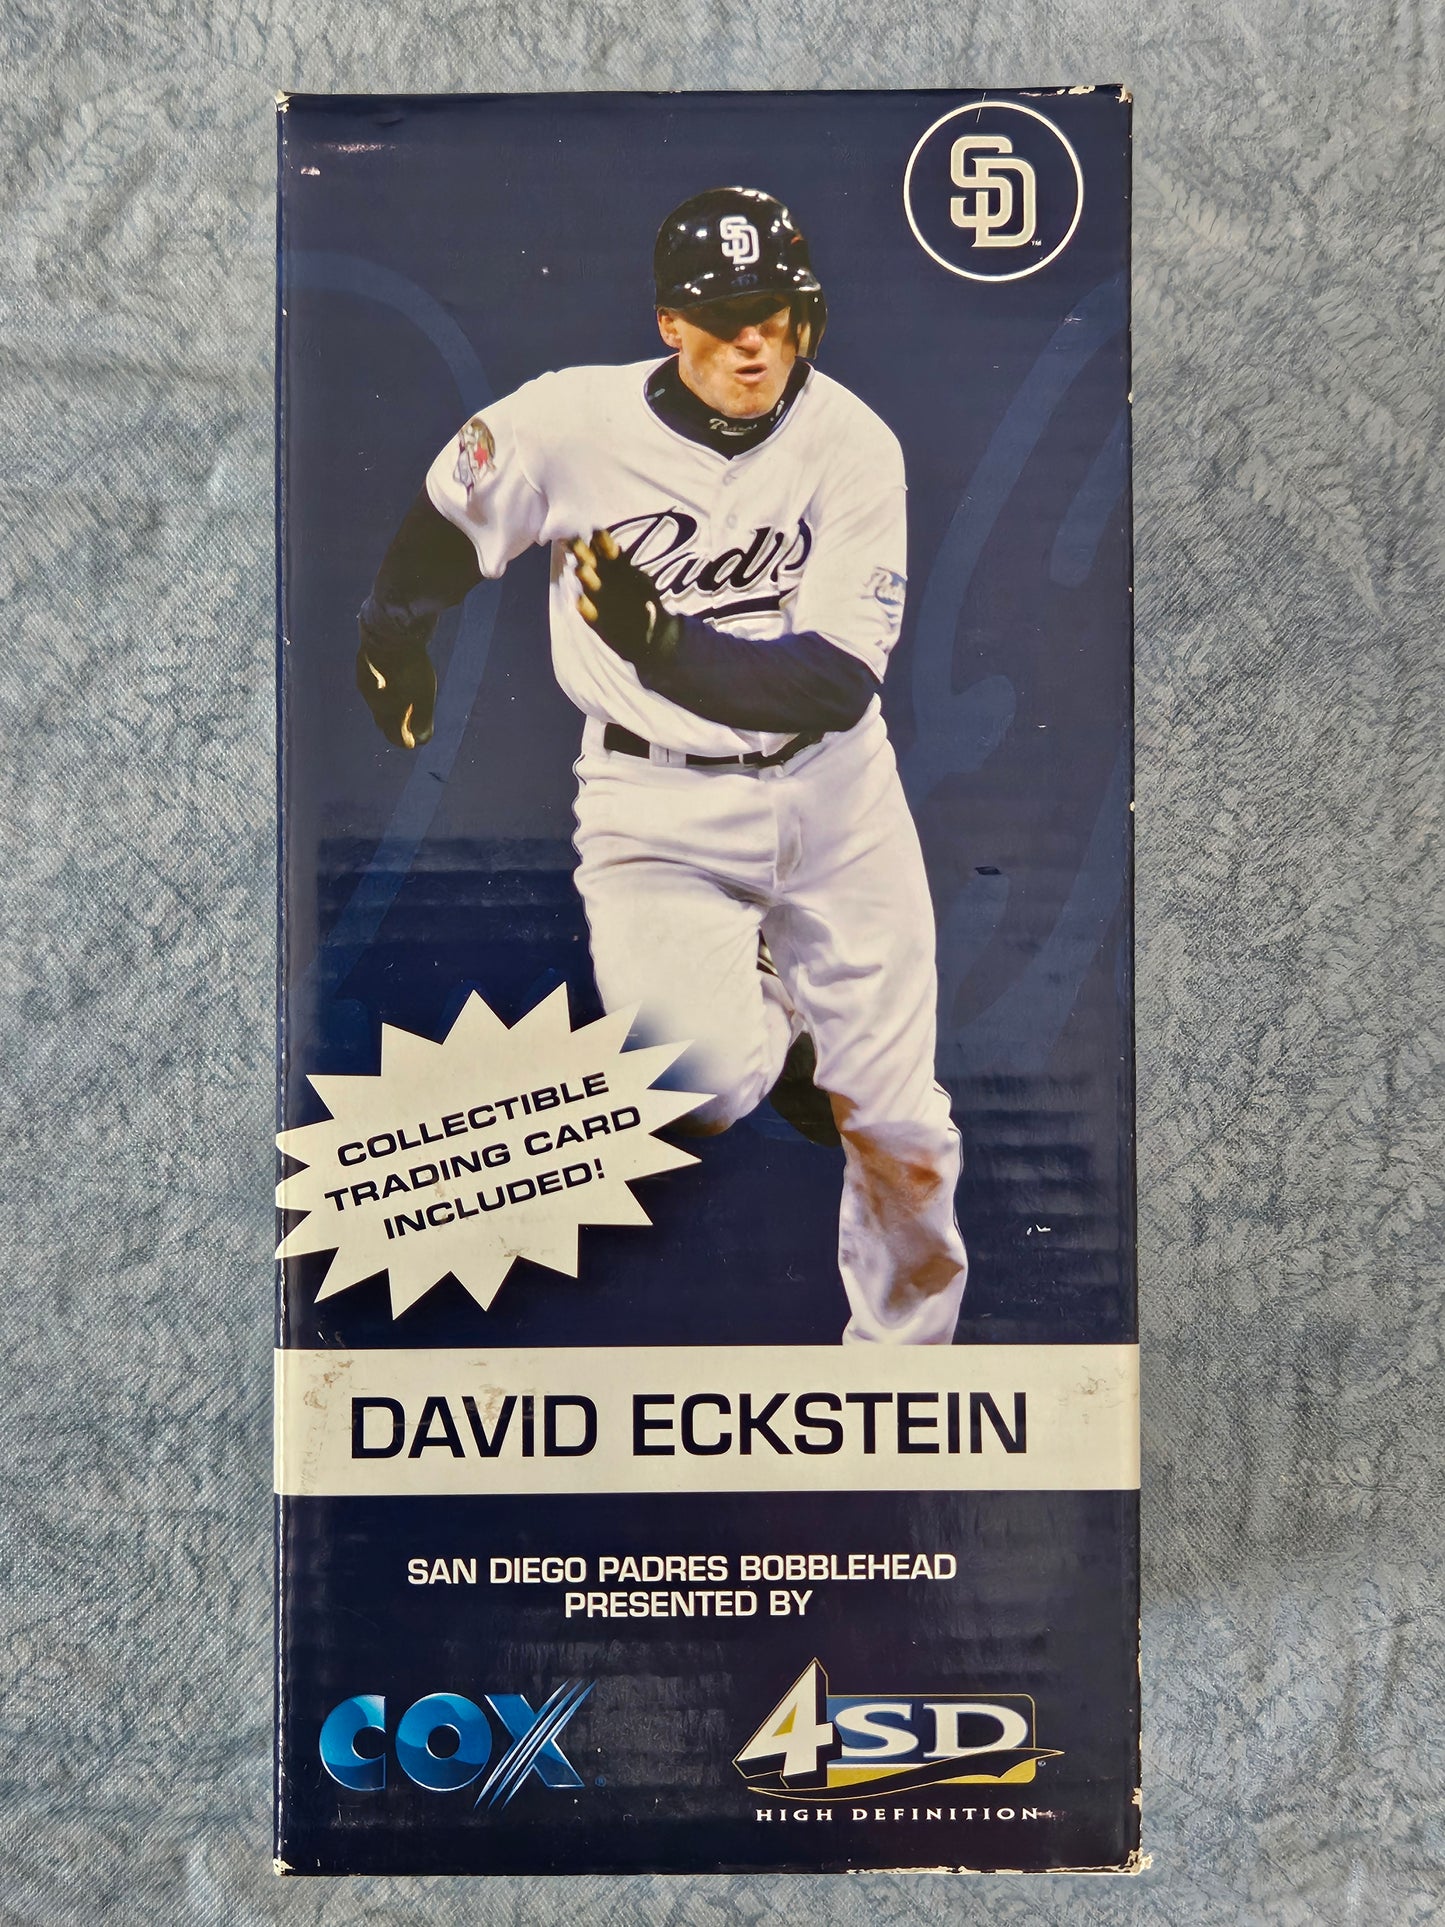 David Eckstein 2010 San Diego Padres Bobble Head BobbleHead In Box With Card New